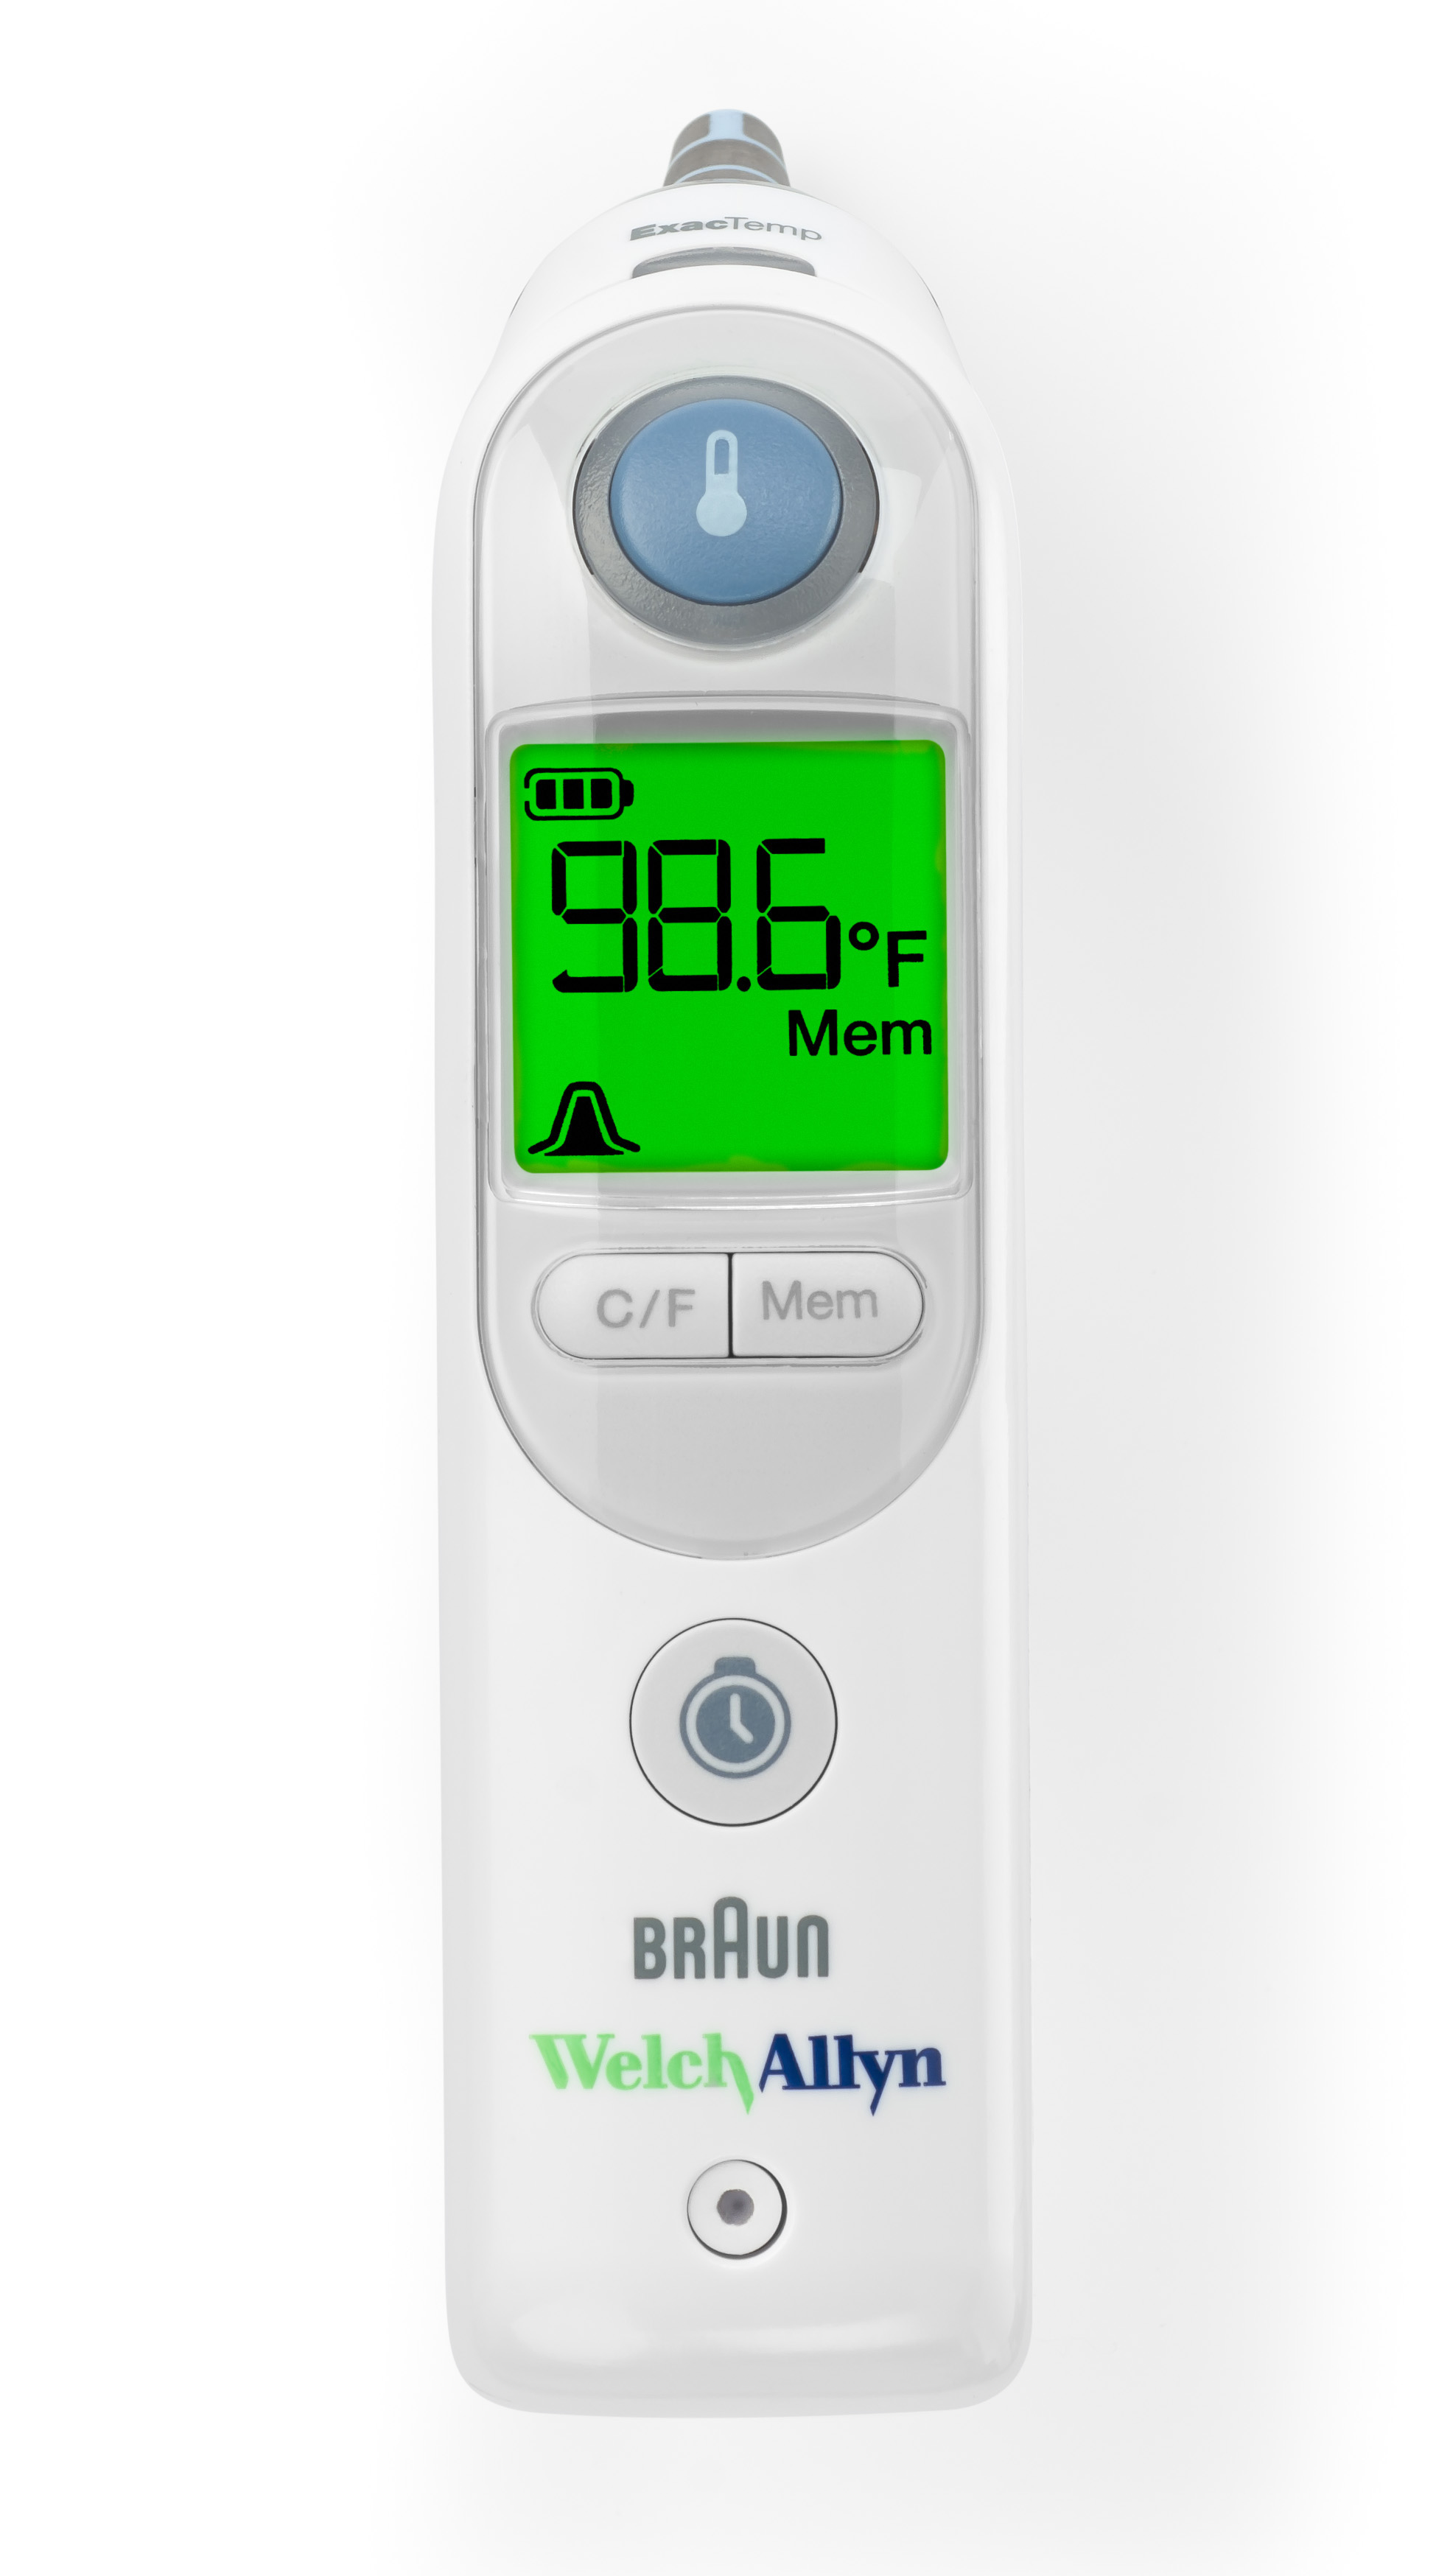 Welch Allyn Braun Thermoscan Pro 6000 Ear Thermometer with Small Cradle (1  Box Cradle). ID# 06000-200